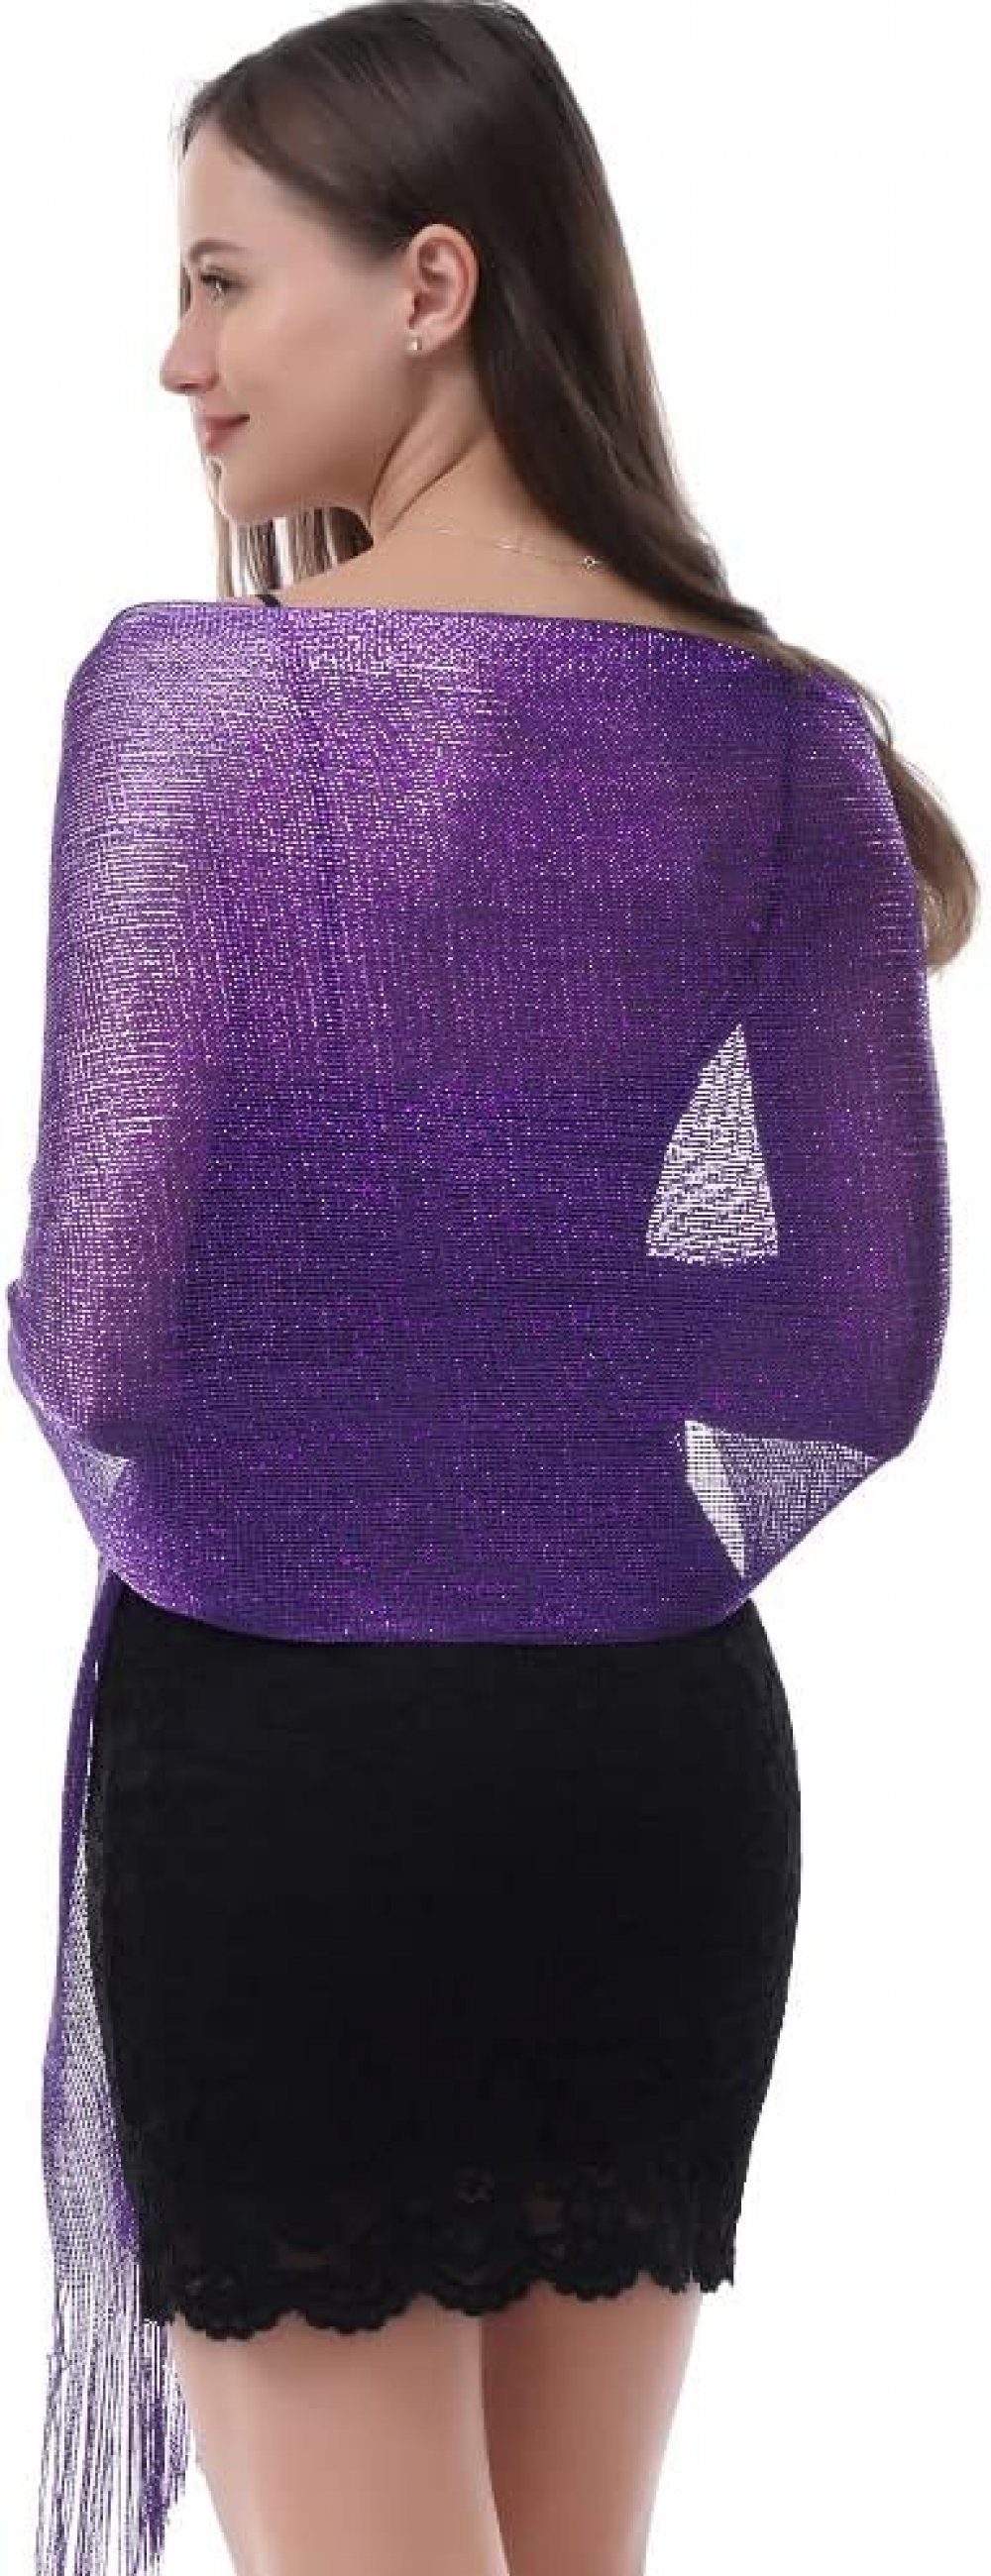 parties Holiday sparkling Tiefviolett suitable evening WaKuKa shawl Schal buckle for metal